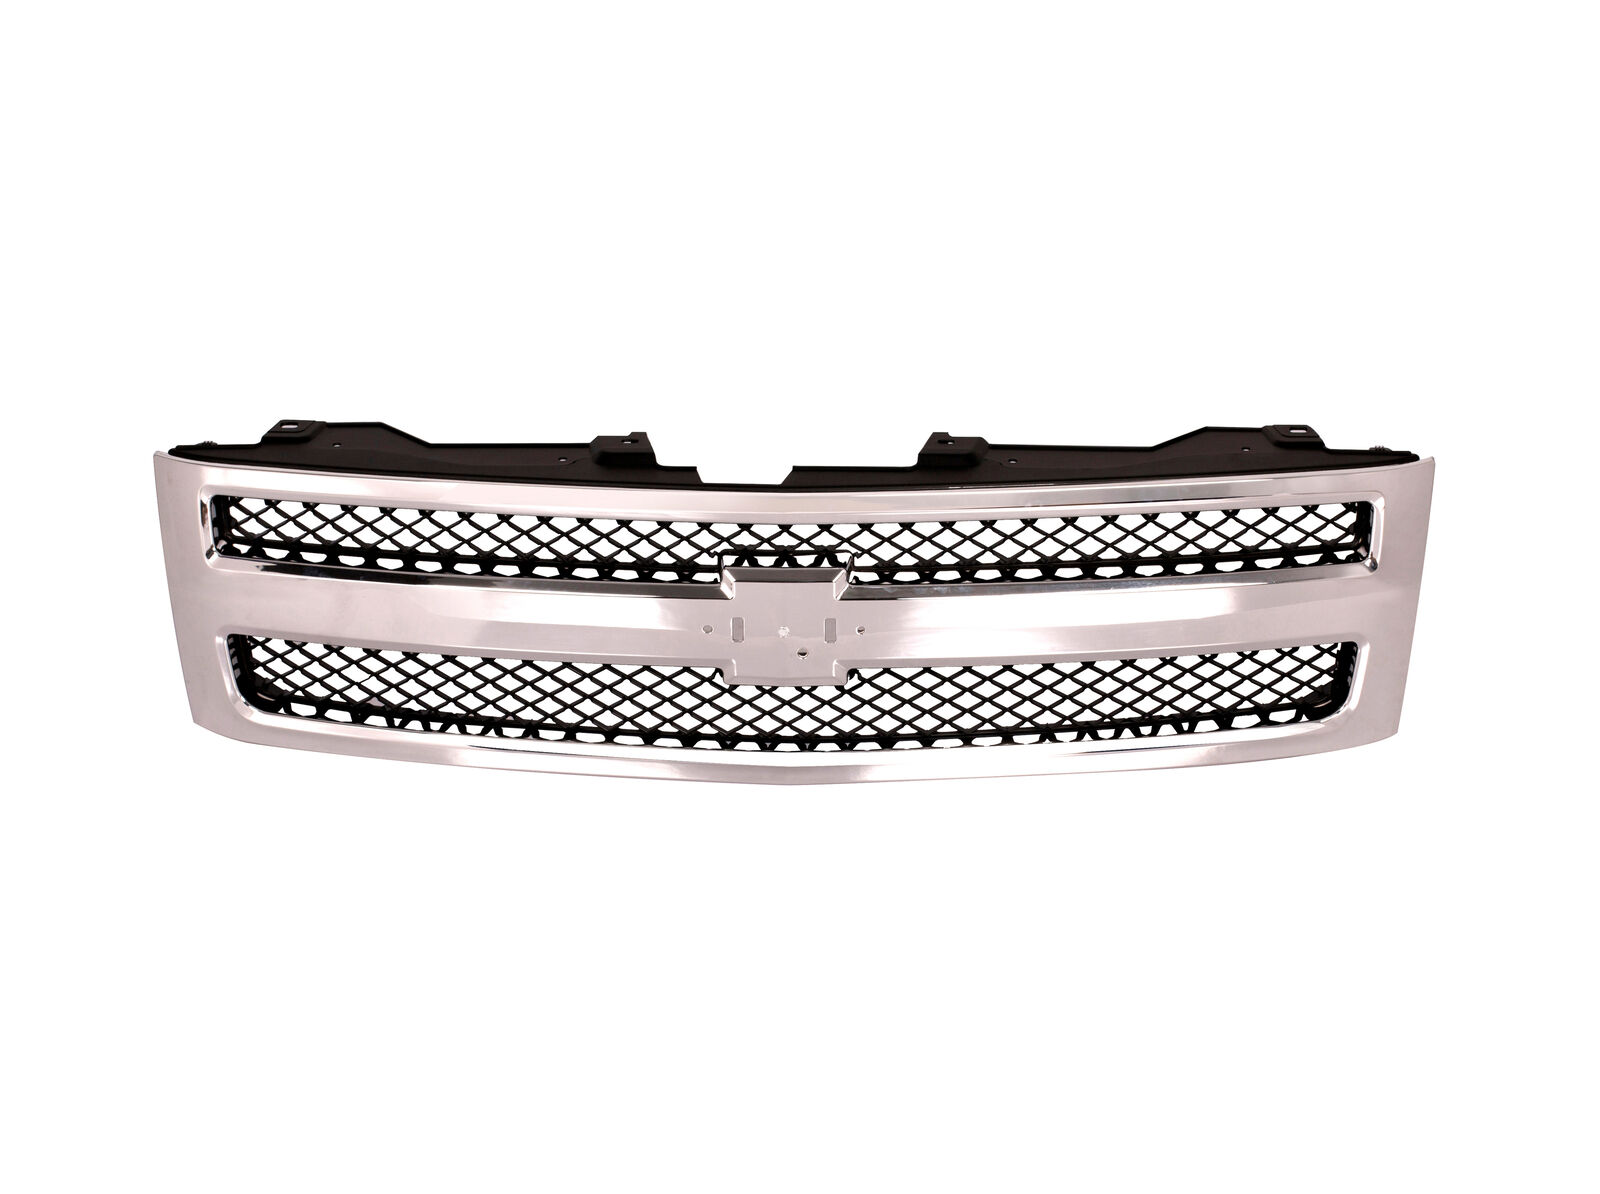 Front Chrome Grille w/Black Insert For 07-13 Chevy Silverado 1500 Pickup Truck